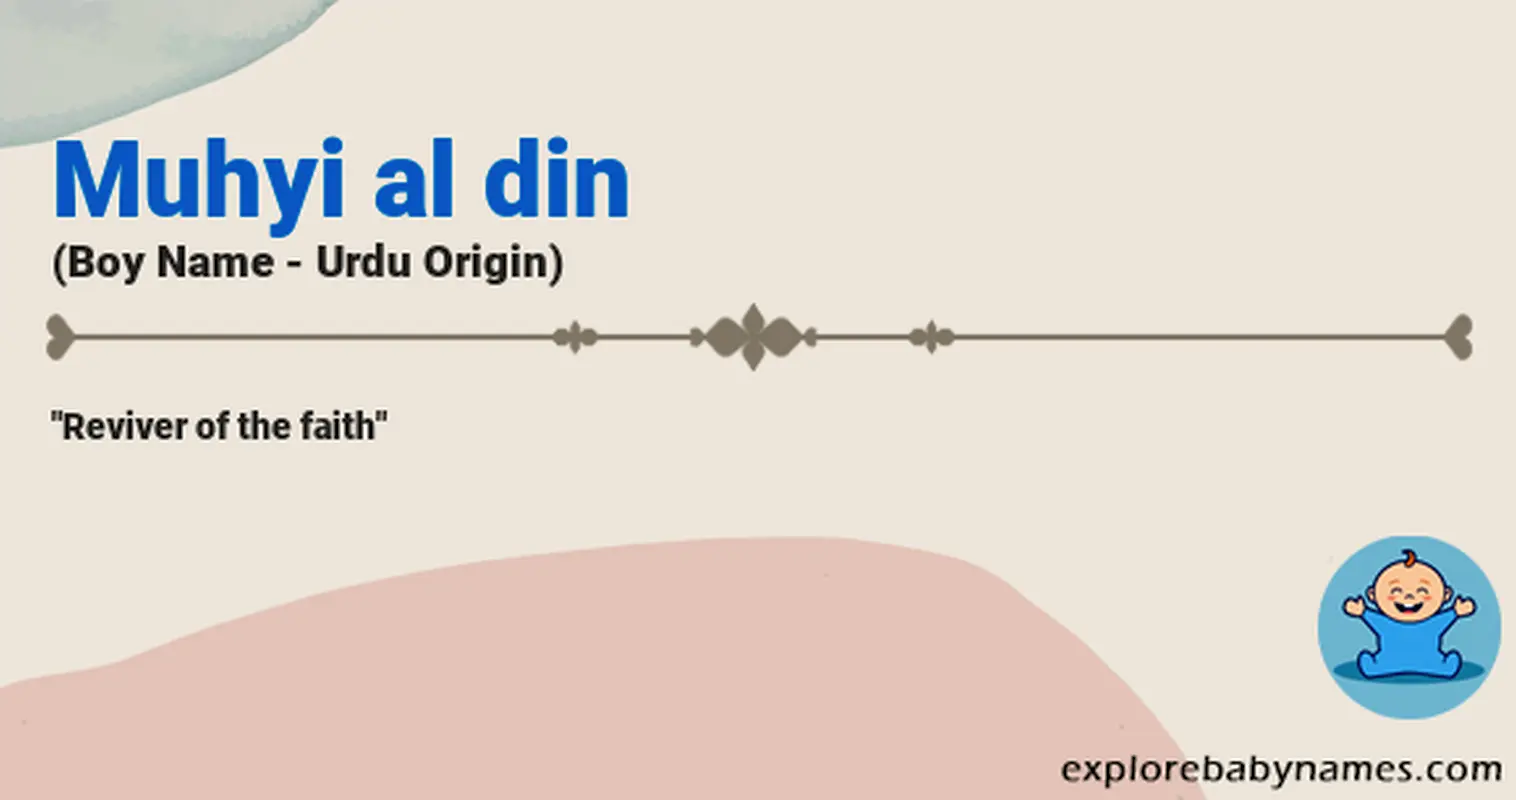 Meaning of Muhyi al din